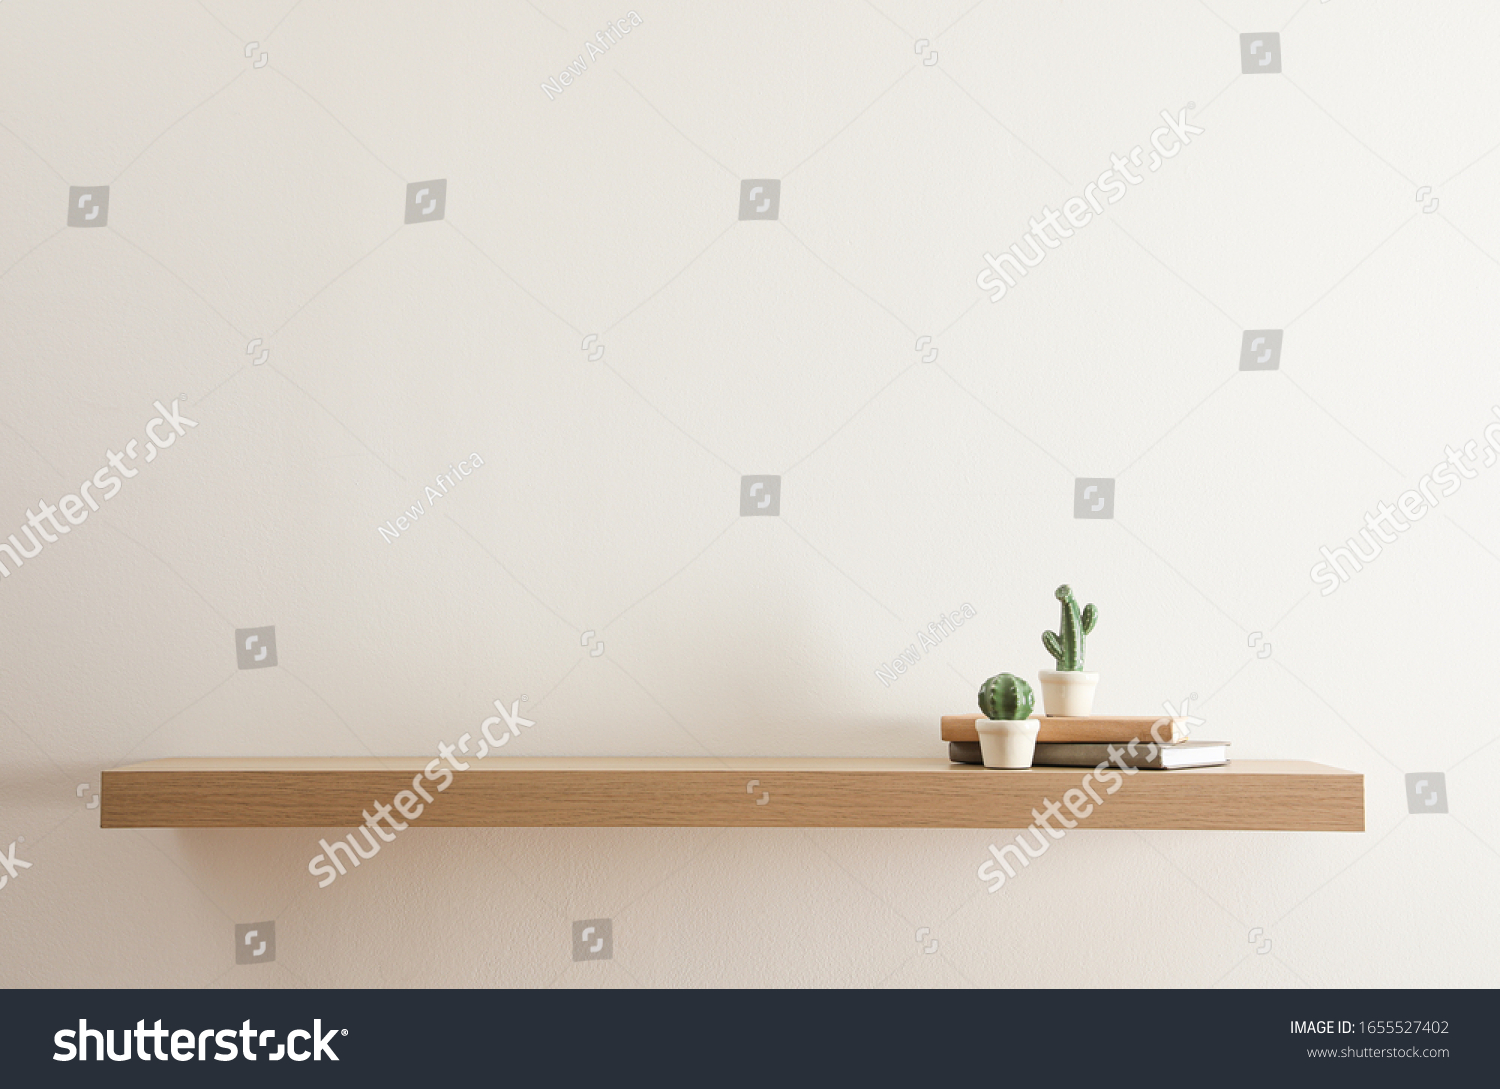 Wooden shelf with books and decorative cactuses on light wall #1655527402